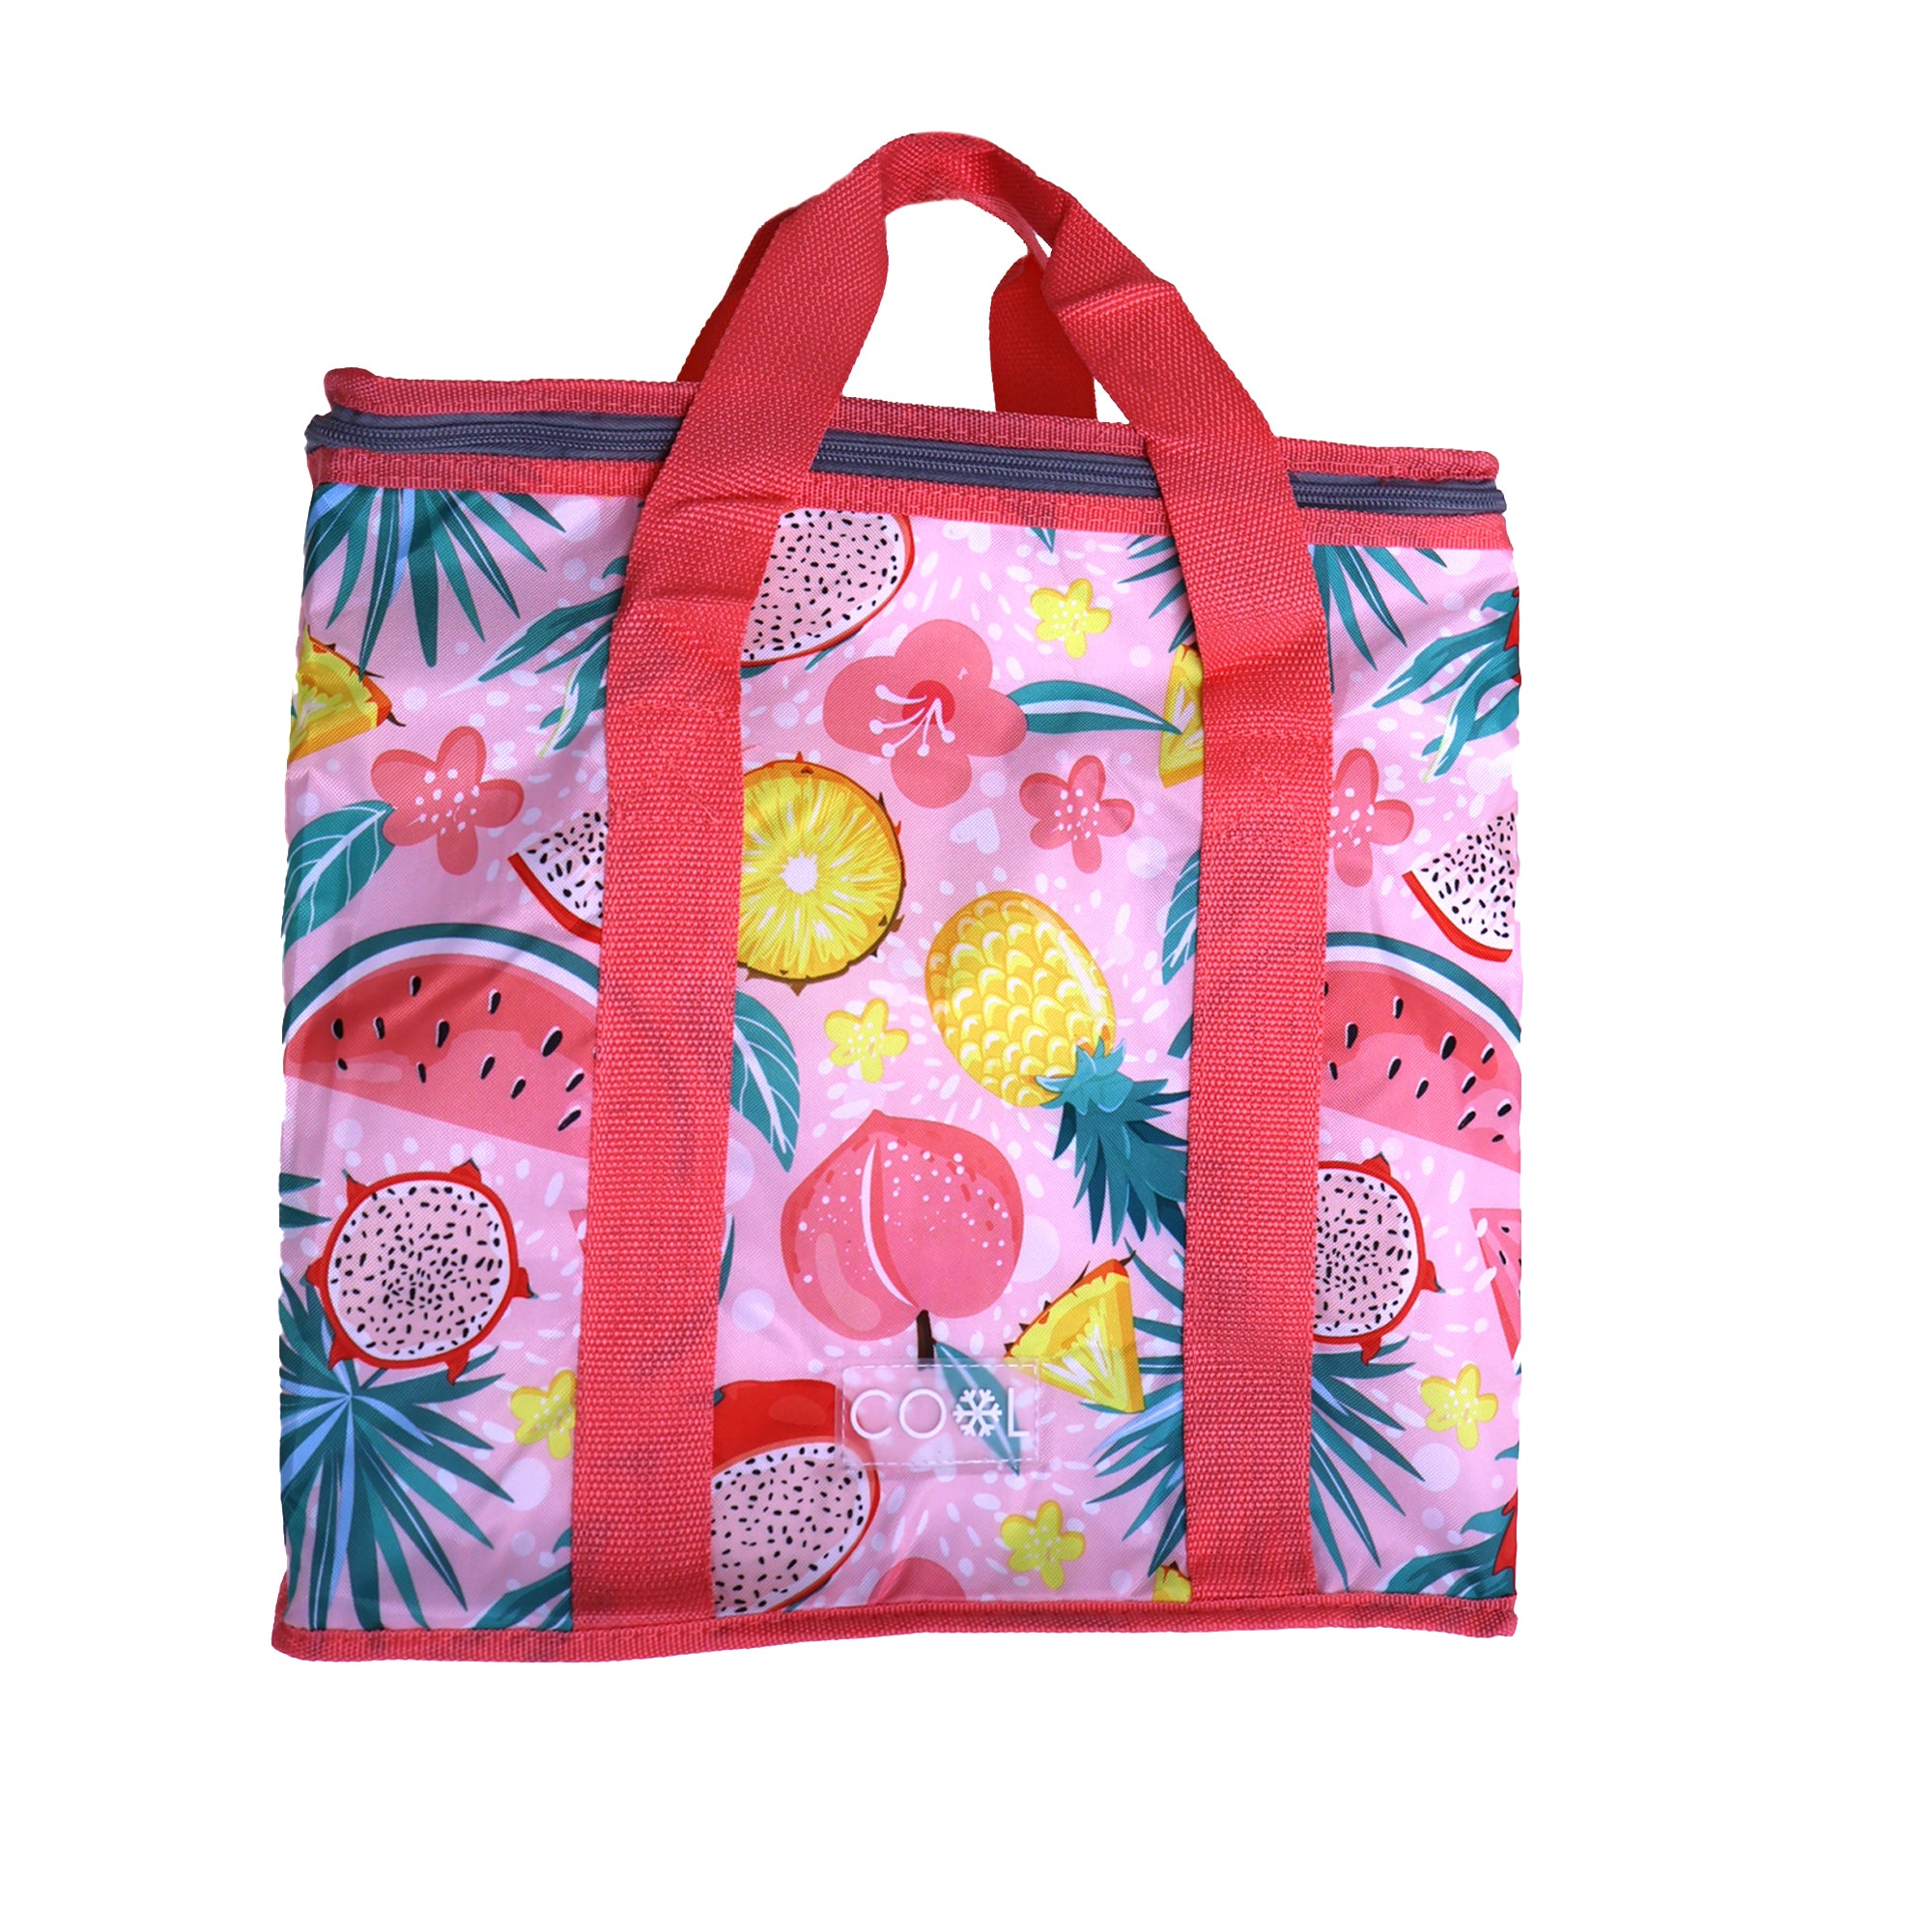 Cooler Bag Insulated with Handles - 16 Litres - Tropical Fruits Design